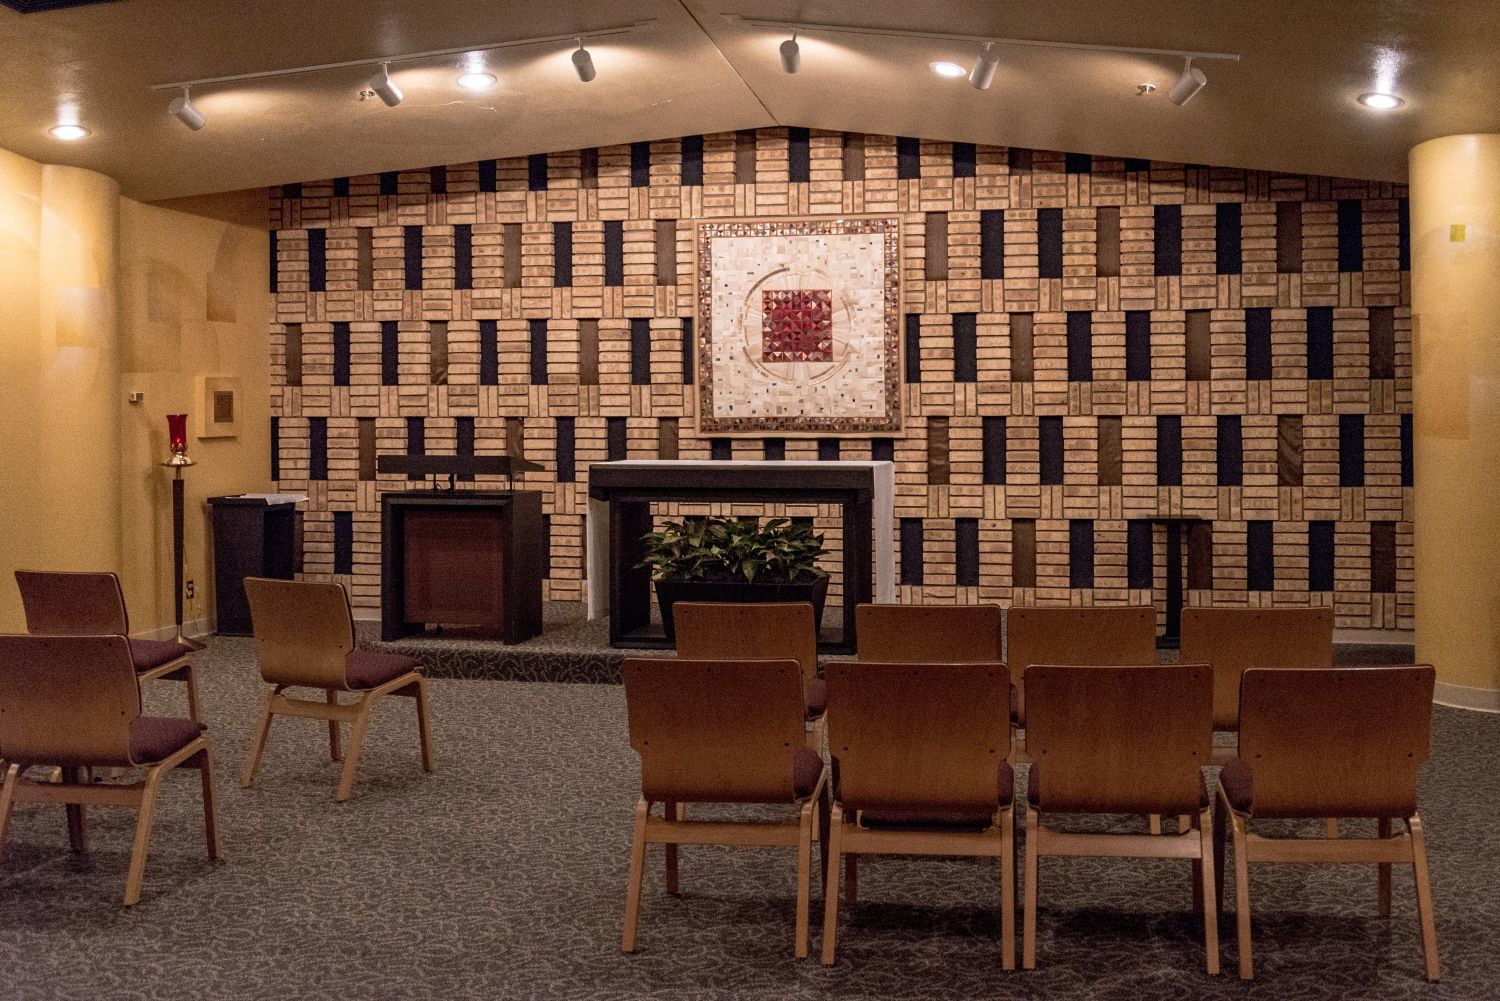 regions chapel shared with gillette children's